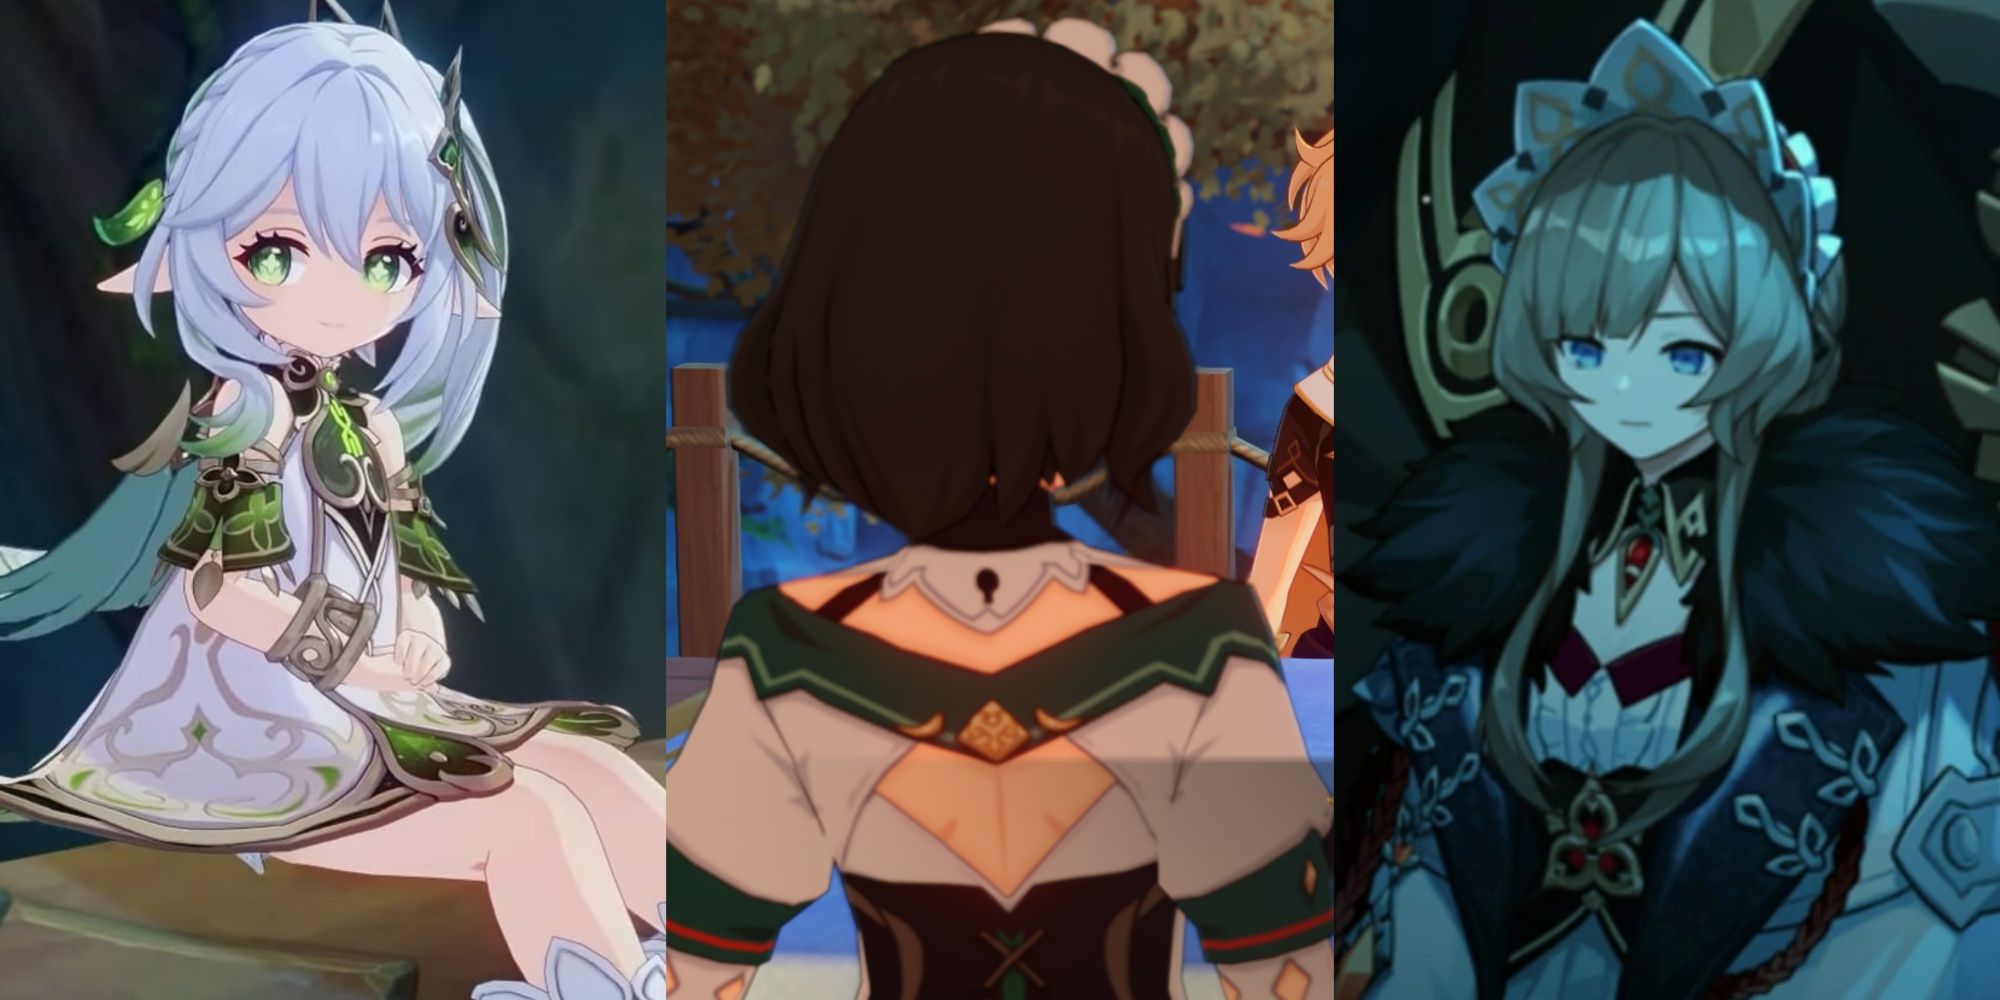 Nahida and Sandrone sitting in the left and right images, Katheryne's back to the viewer showing a keyhole in the middle image